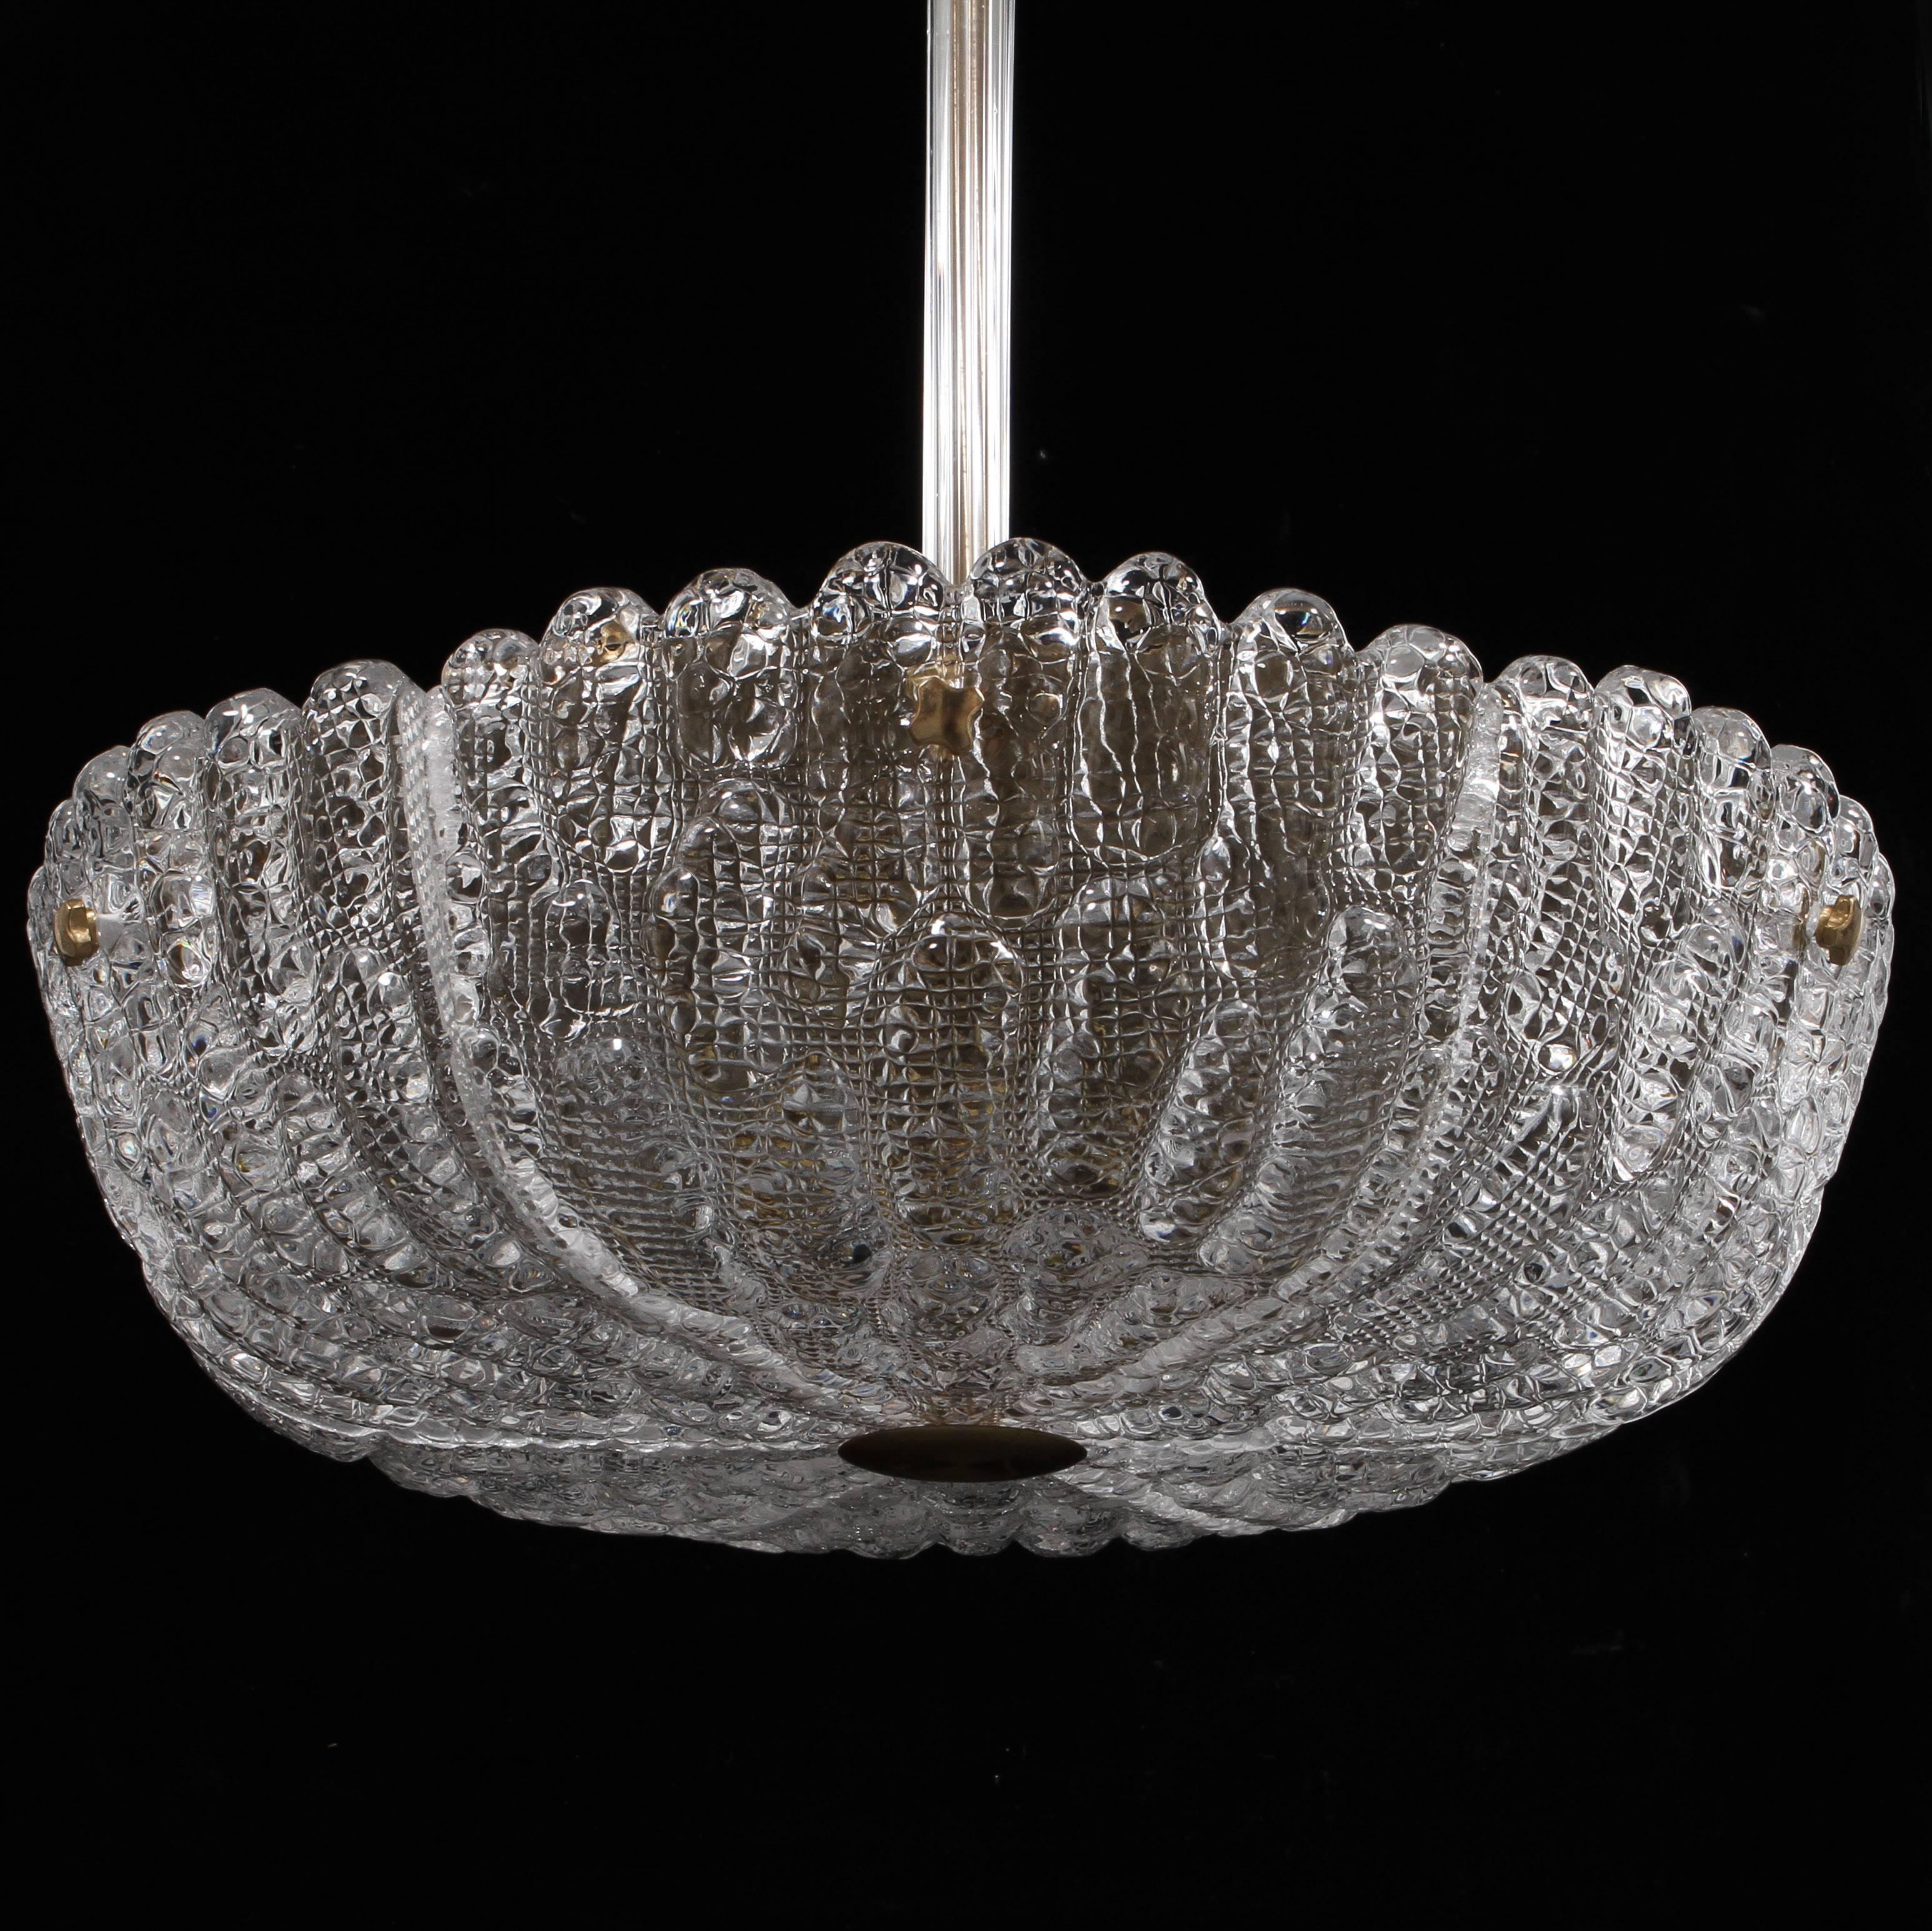 A vintage Chandelier by Carl Fagerlund for Orrefors, Sweden, circa 1960.
Measures: D 18.5